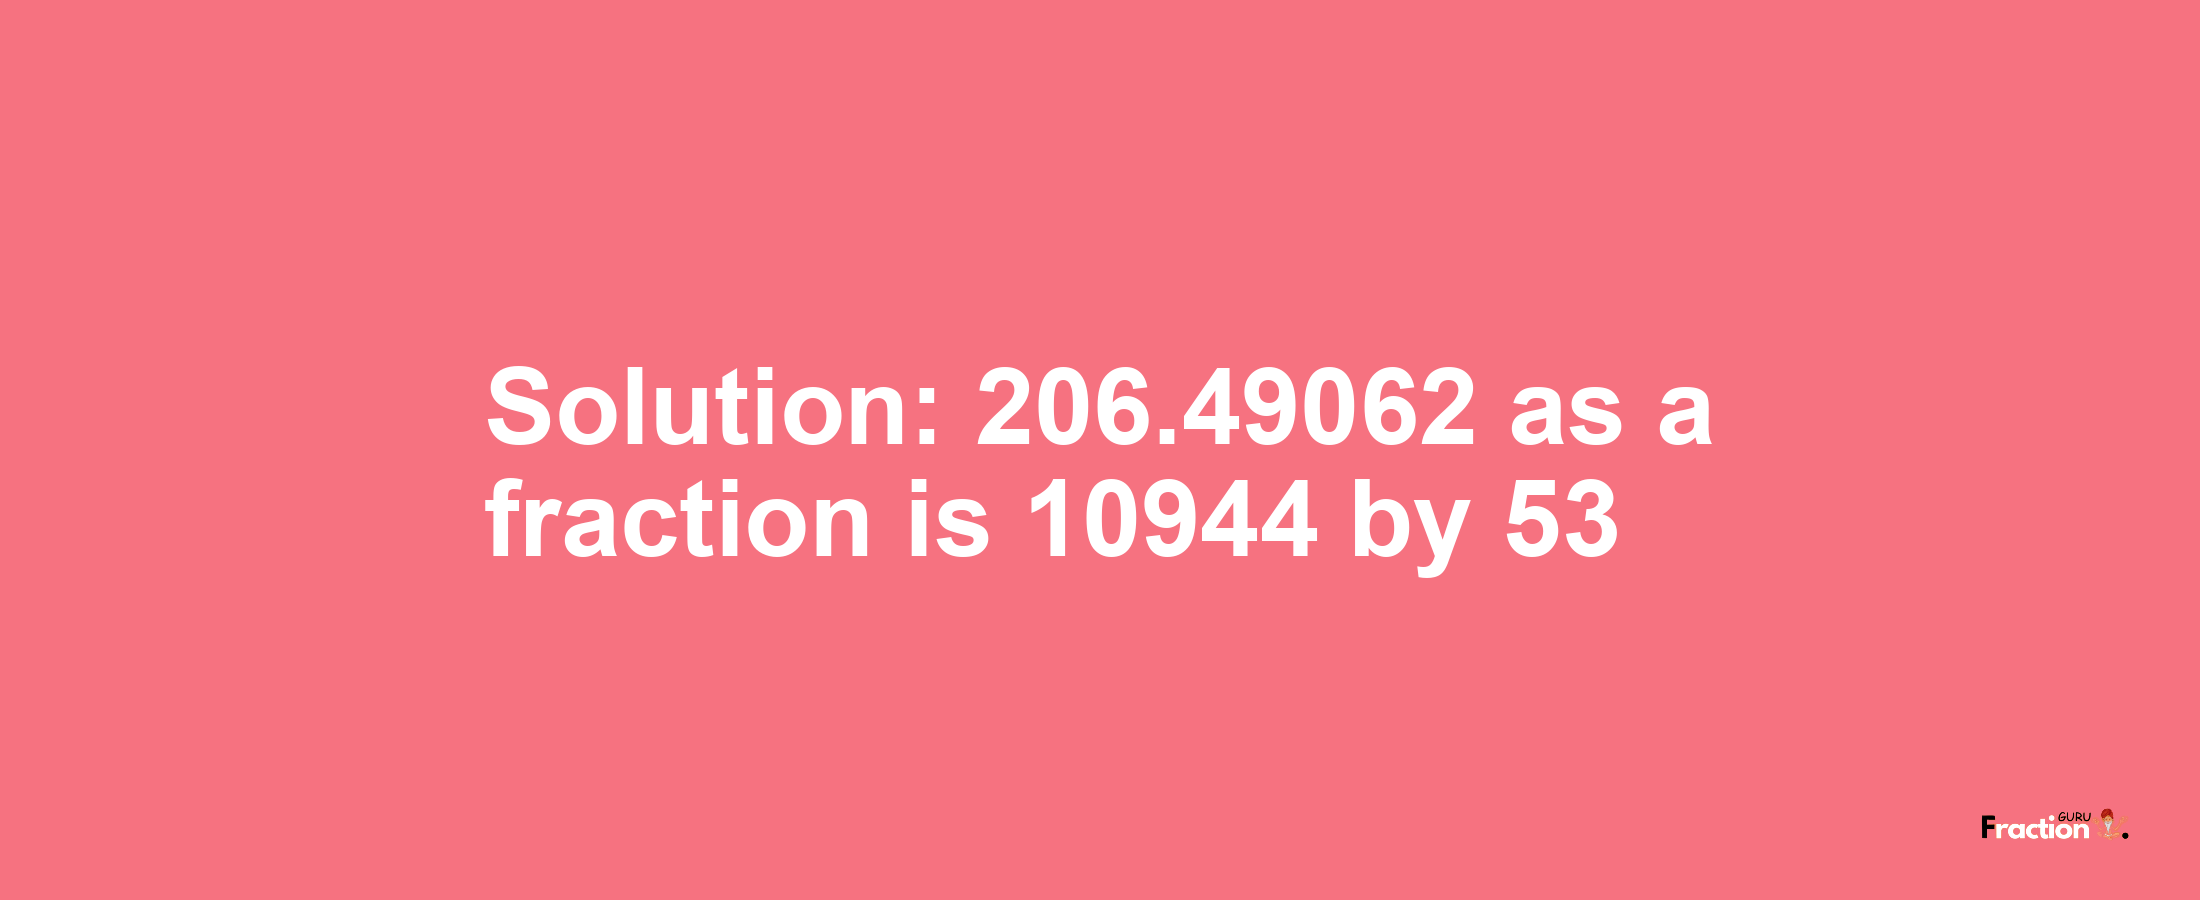 Solution:206.49062 as a fraction is 10944/53